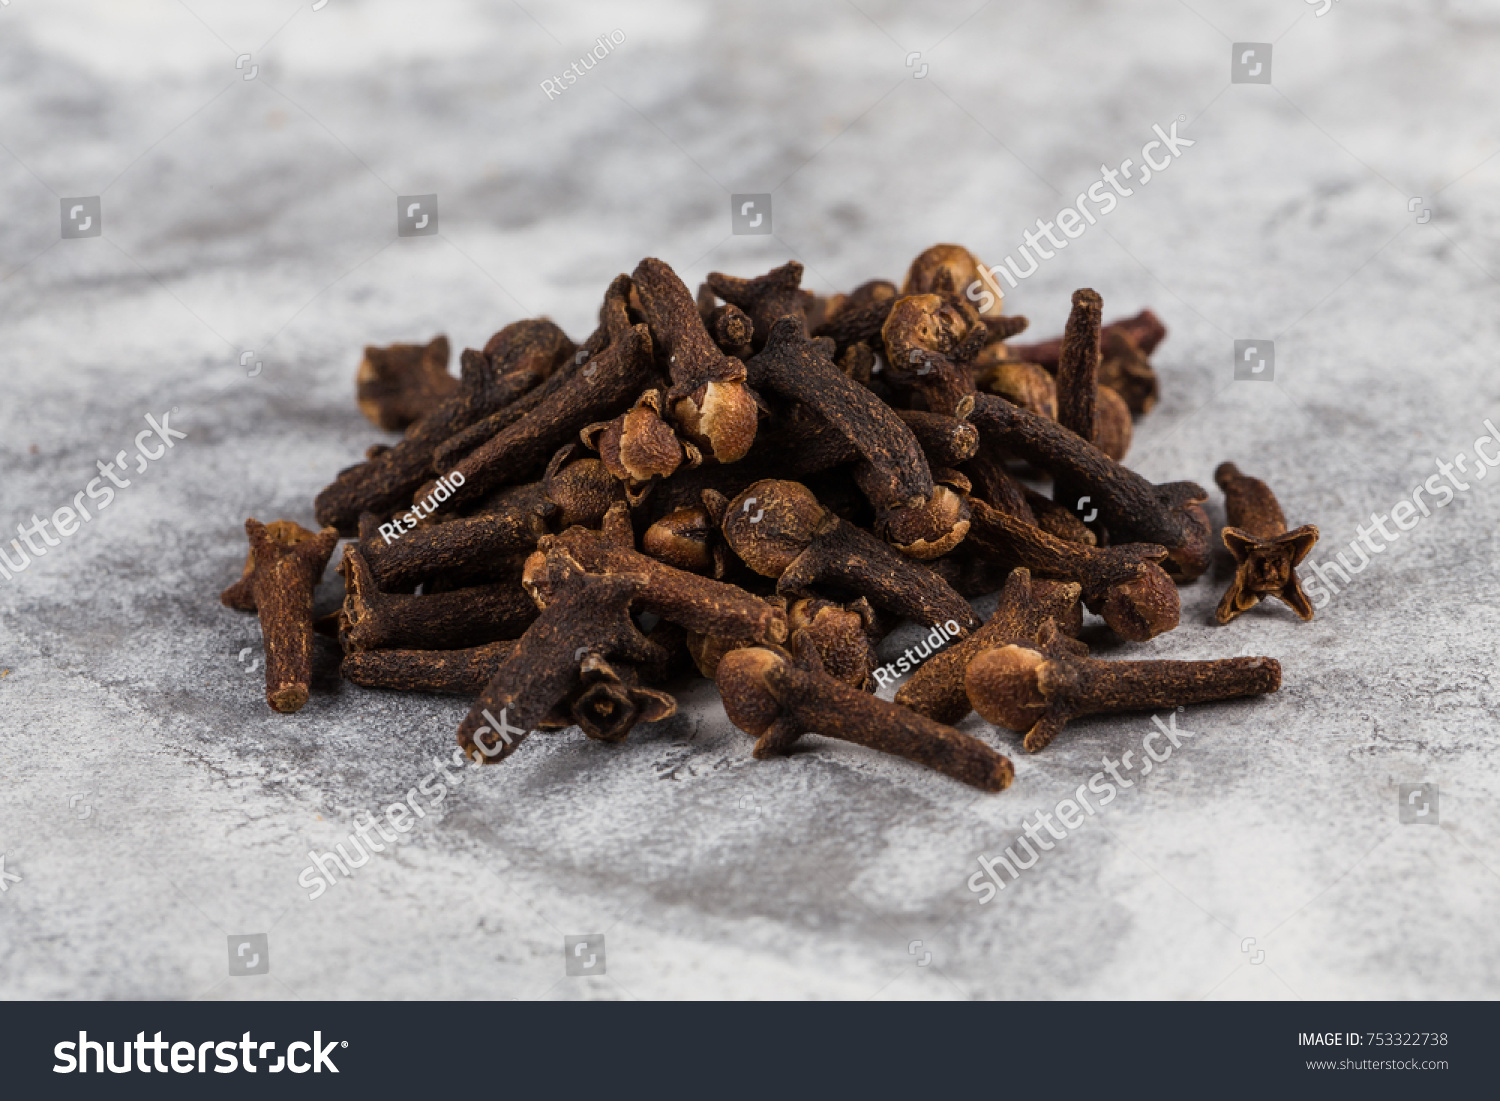 Drying clove spice (Syzygium aromaticum) Cloves are the aromatic flower buds of a tree #753322738